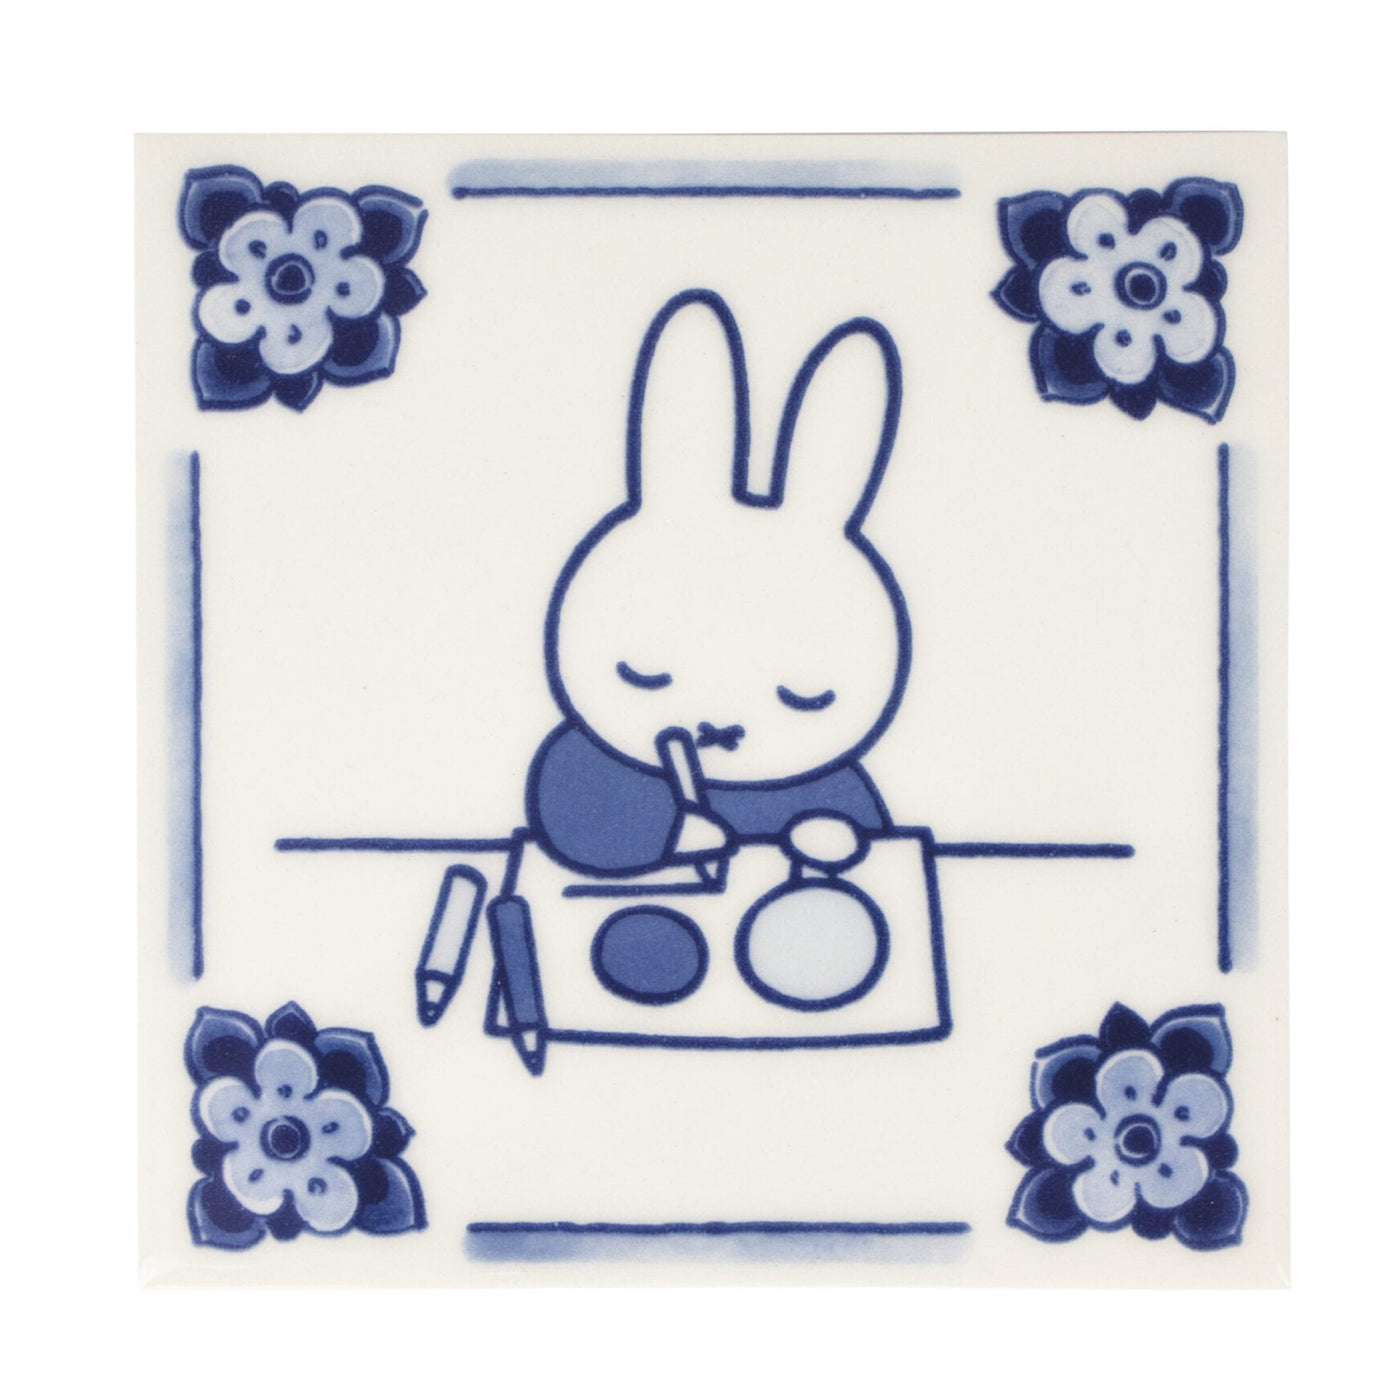 Tile Miffy Coloring Delft Blue by Royal Delft